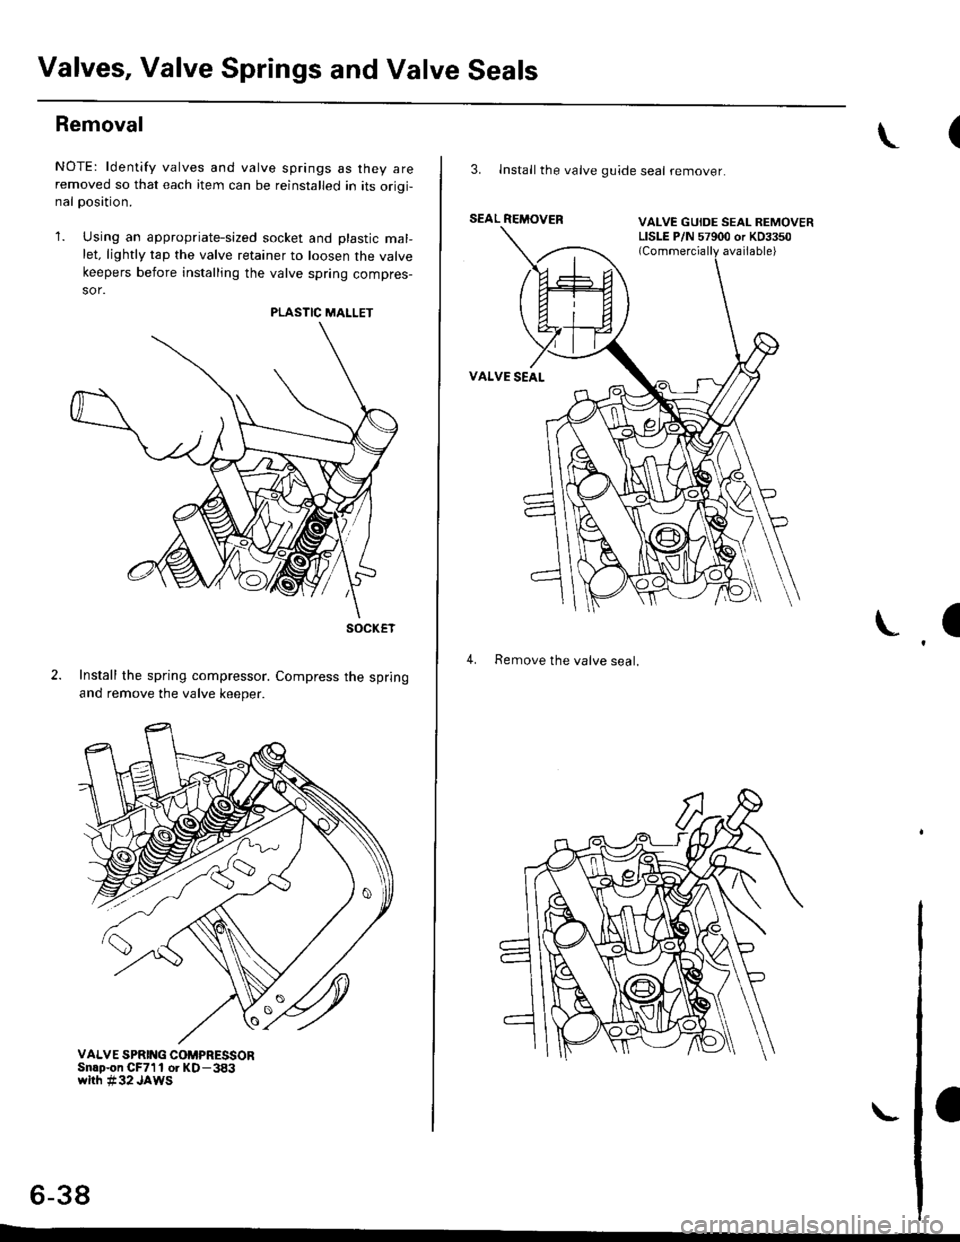 HONDA CIVIC 2000 6.G Workshop Manual Valves, Valve Springs and Valve Seals
Removal
NOTE: ldentify valves and valve springs as they areremoved so that each item can be reinstalled in its orioi-nal oosition.
1. Using an appropriate-sized 